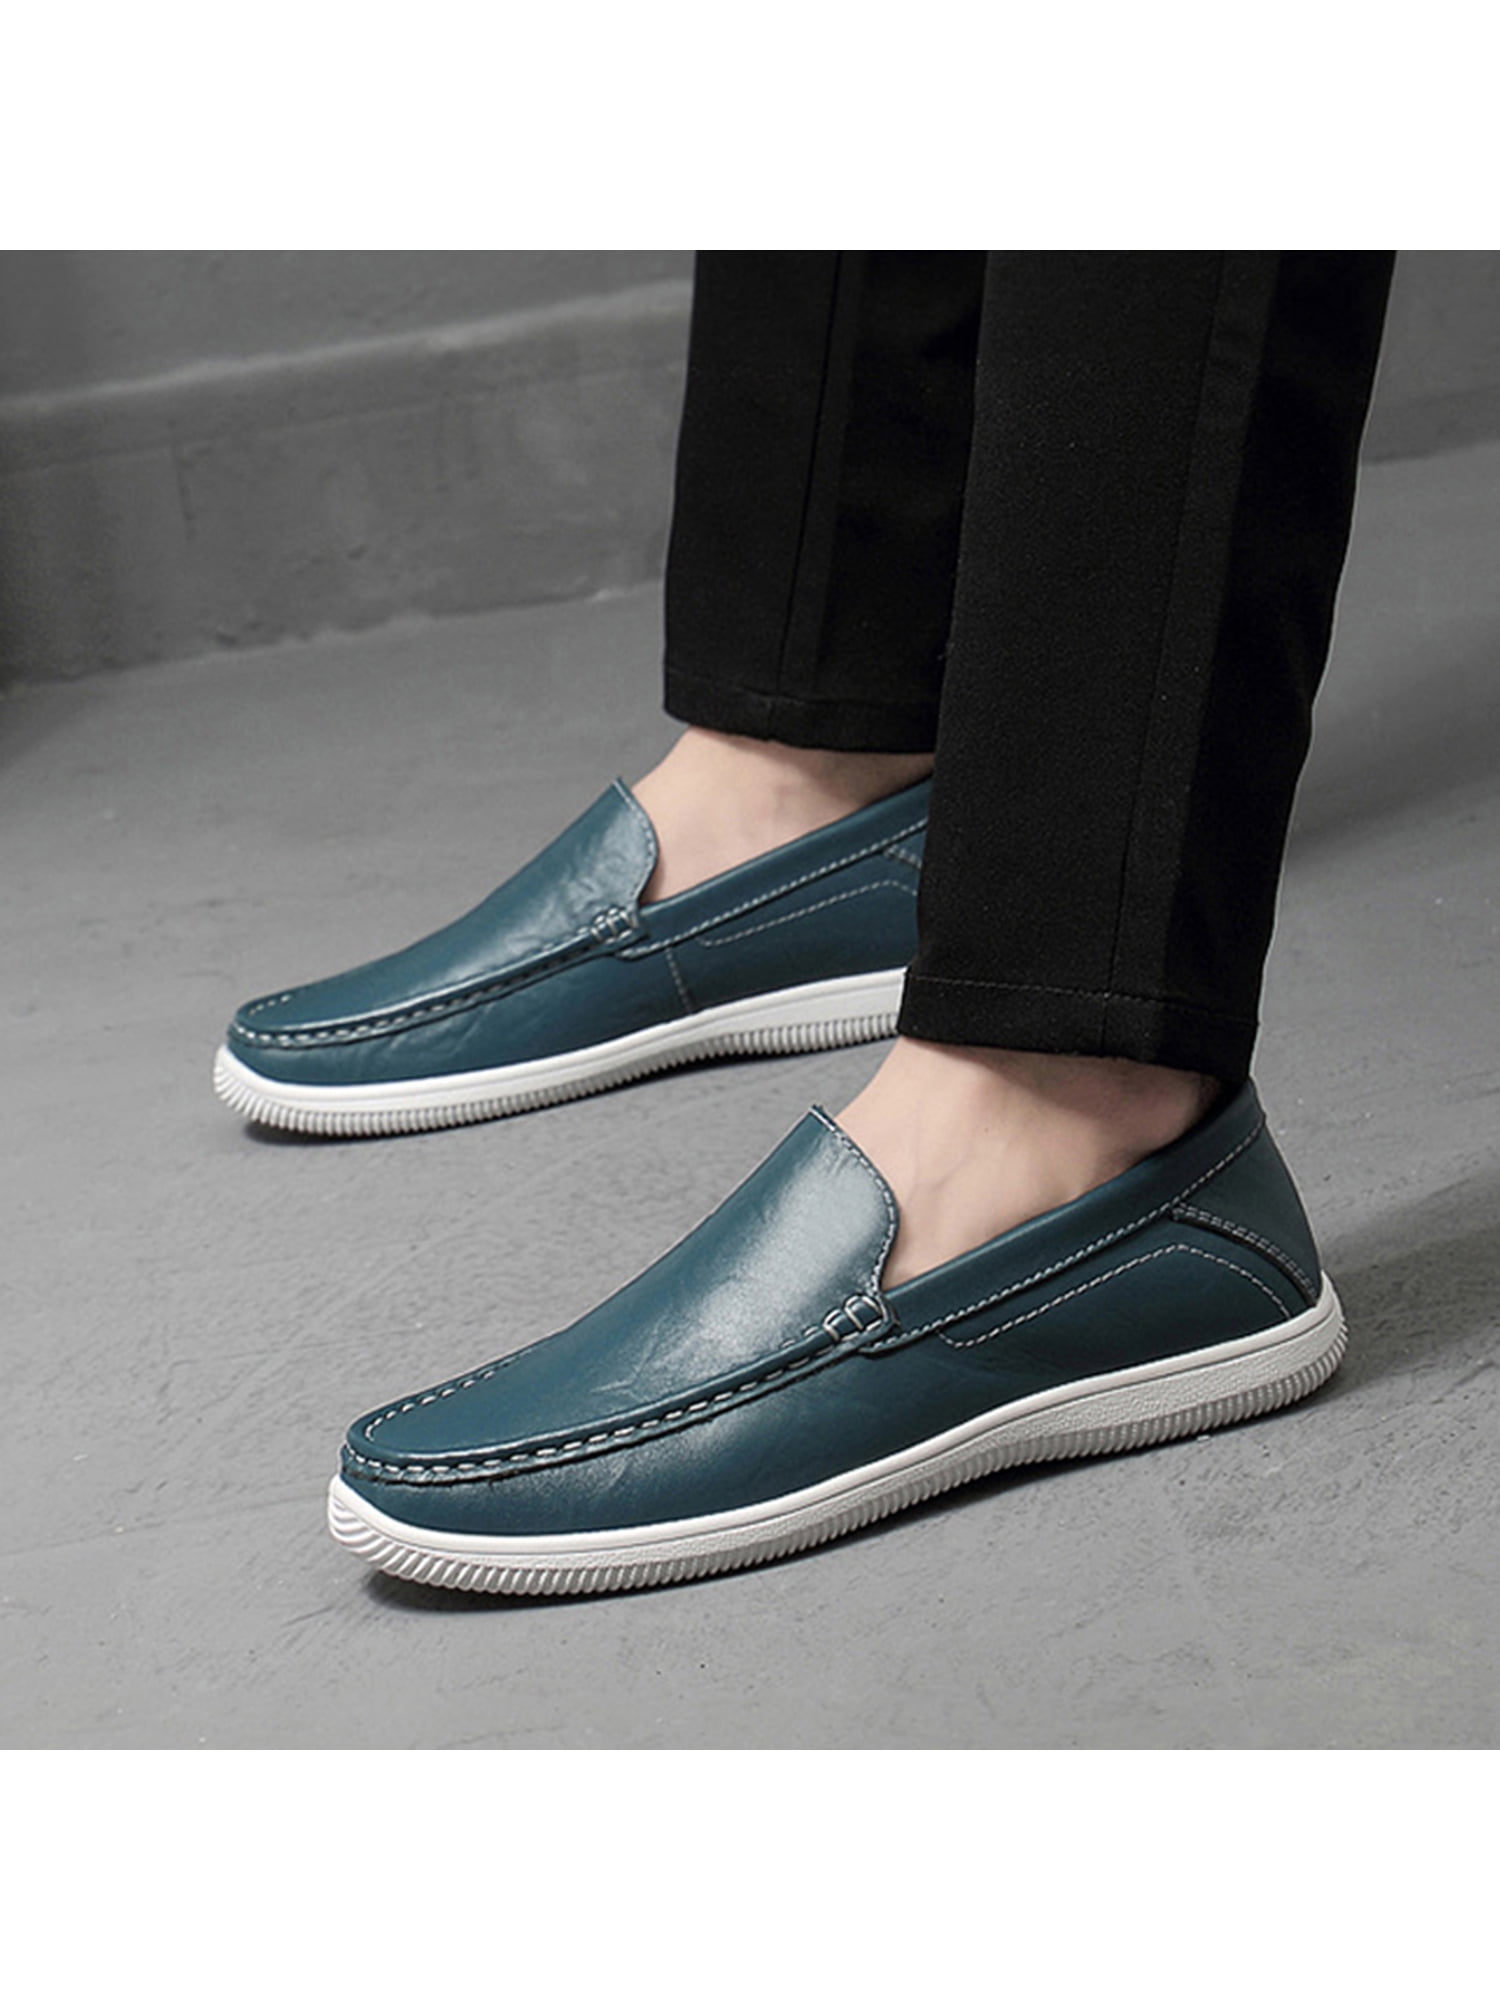 Vic Gray Men Soft Oxford Loafers Slip-on Male Breathable Casual Flats Shoes 